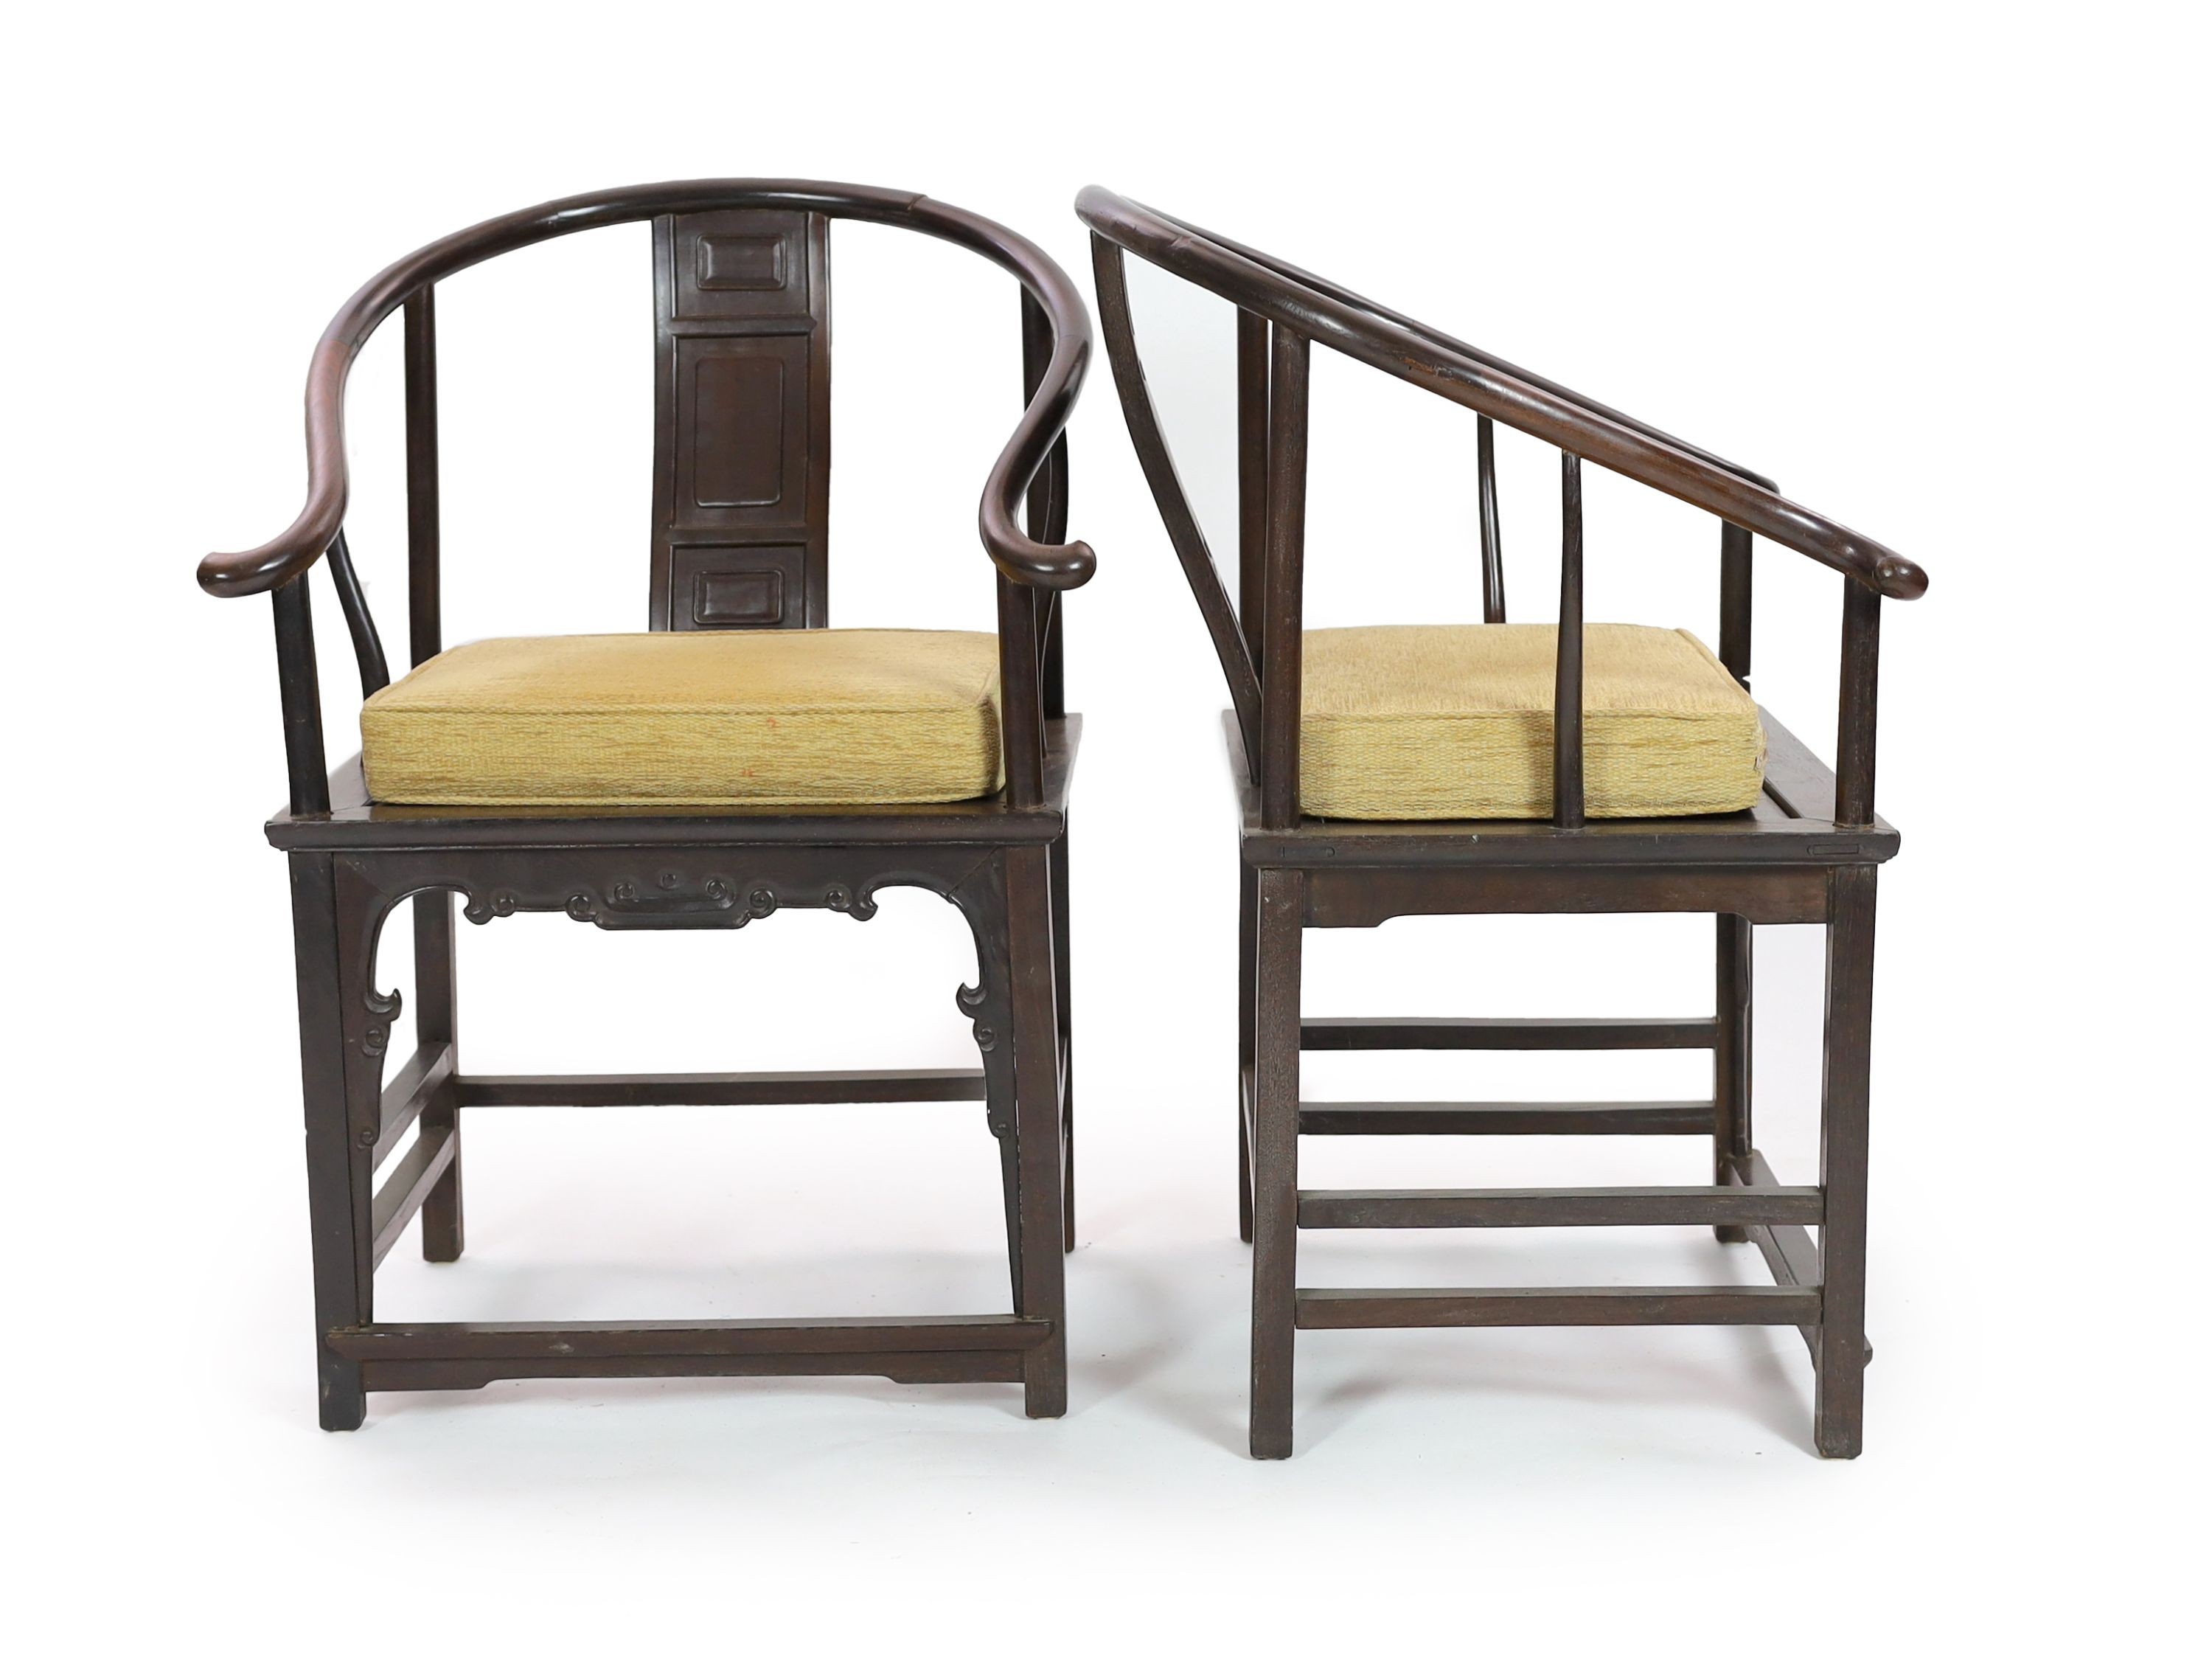 A pair of Chinese tielimu horseshoe-back armchairs, 18th/19th century